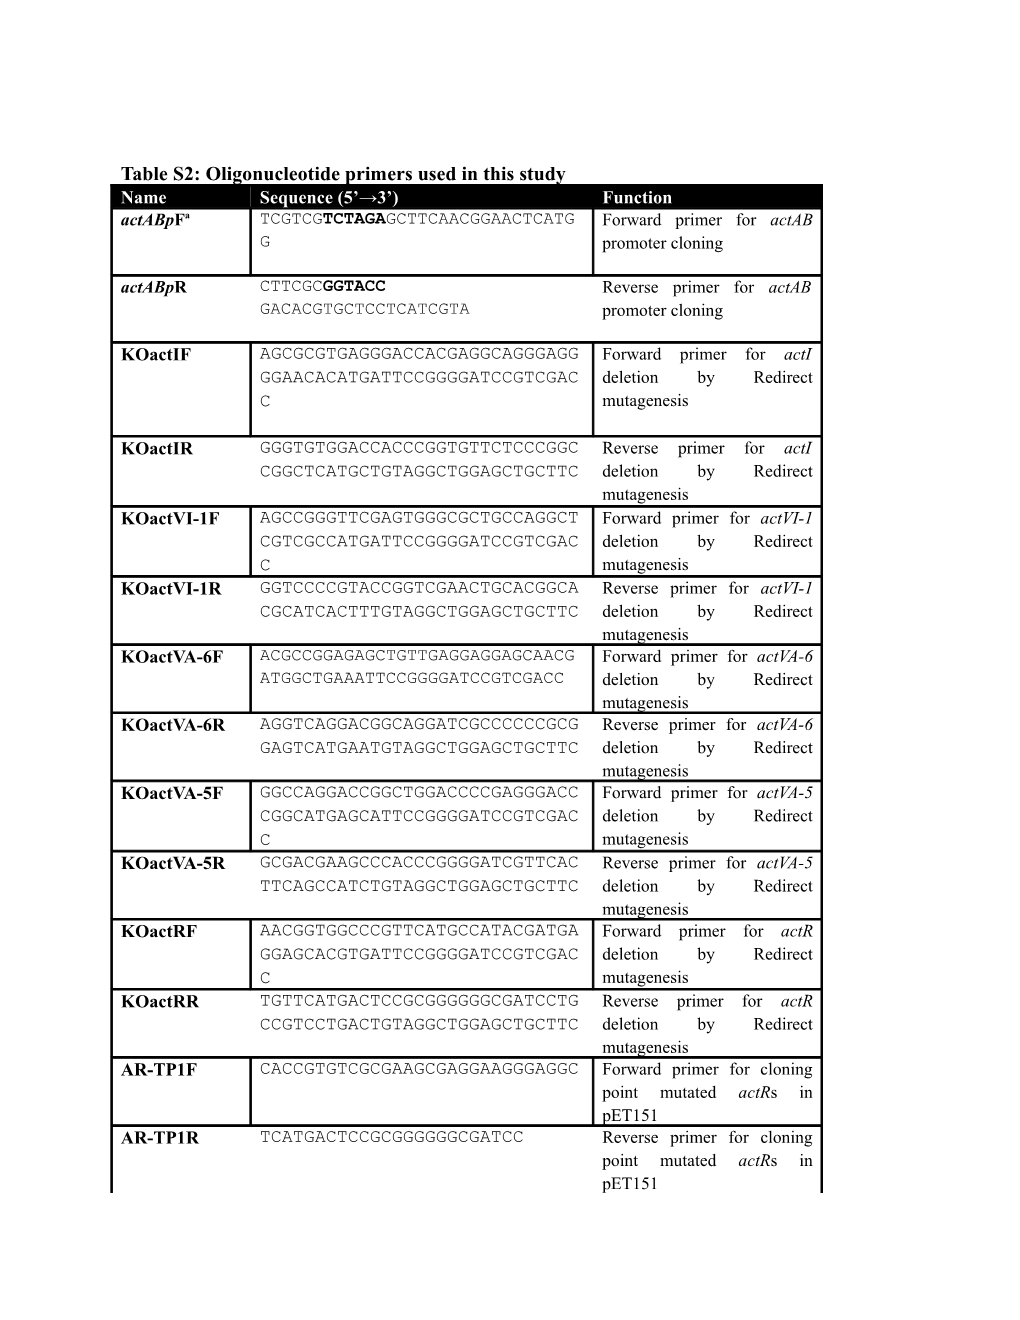 Table S2: Oligonucleotide Primers Used in This Study